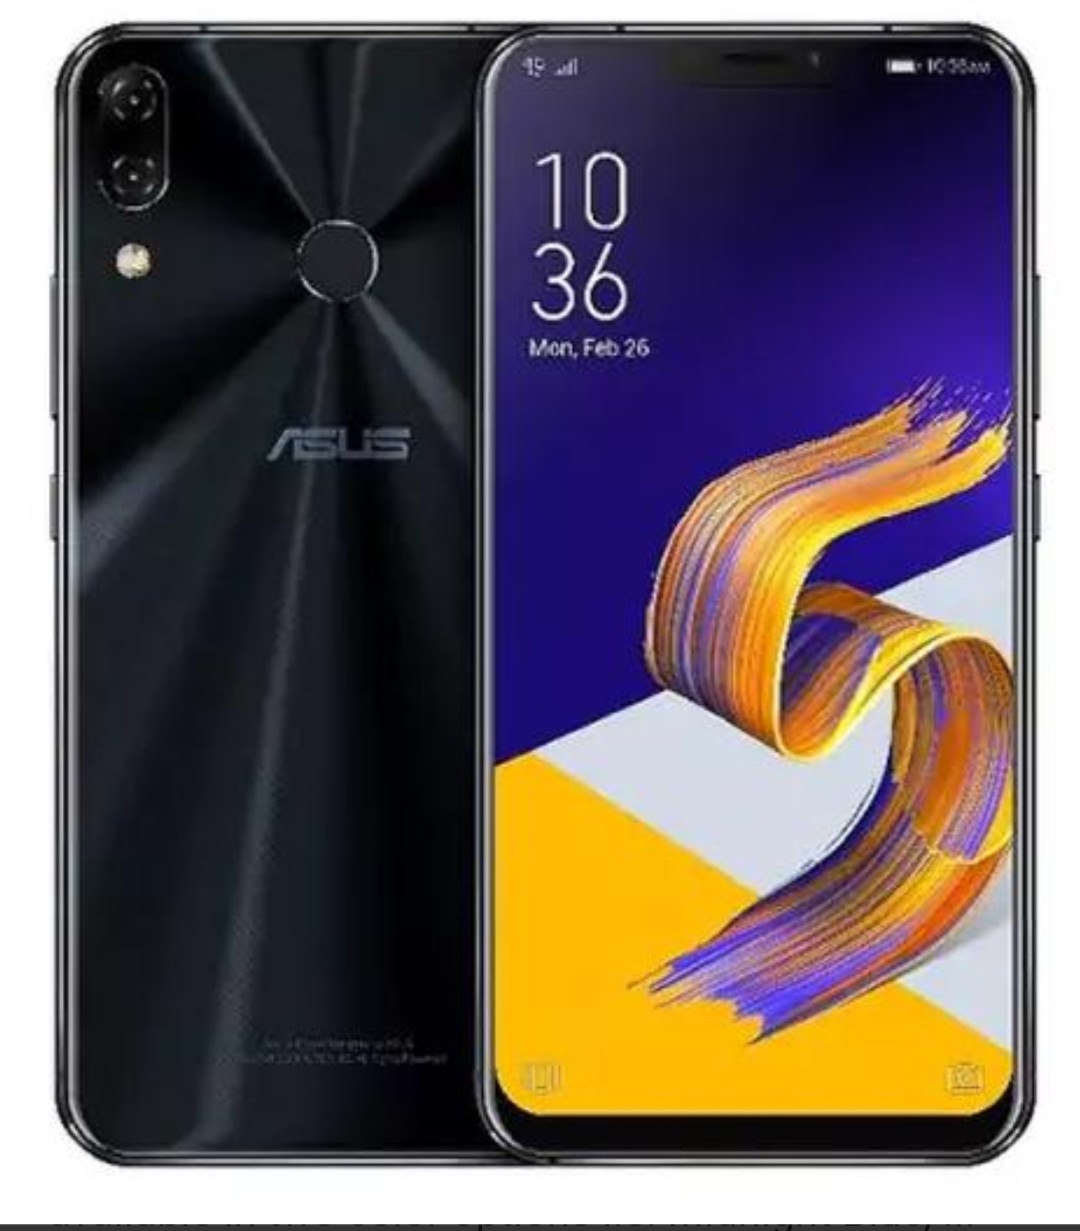 ZenFone 5Z will be upgraded to Android 9 Pie as early as possible, but will wait until 2019.